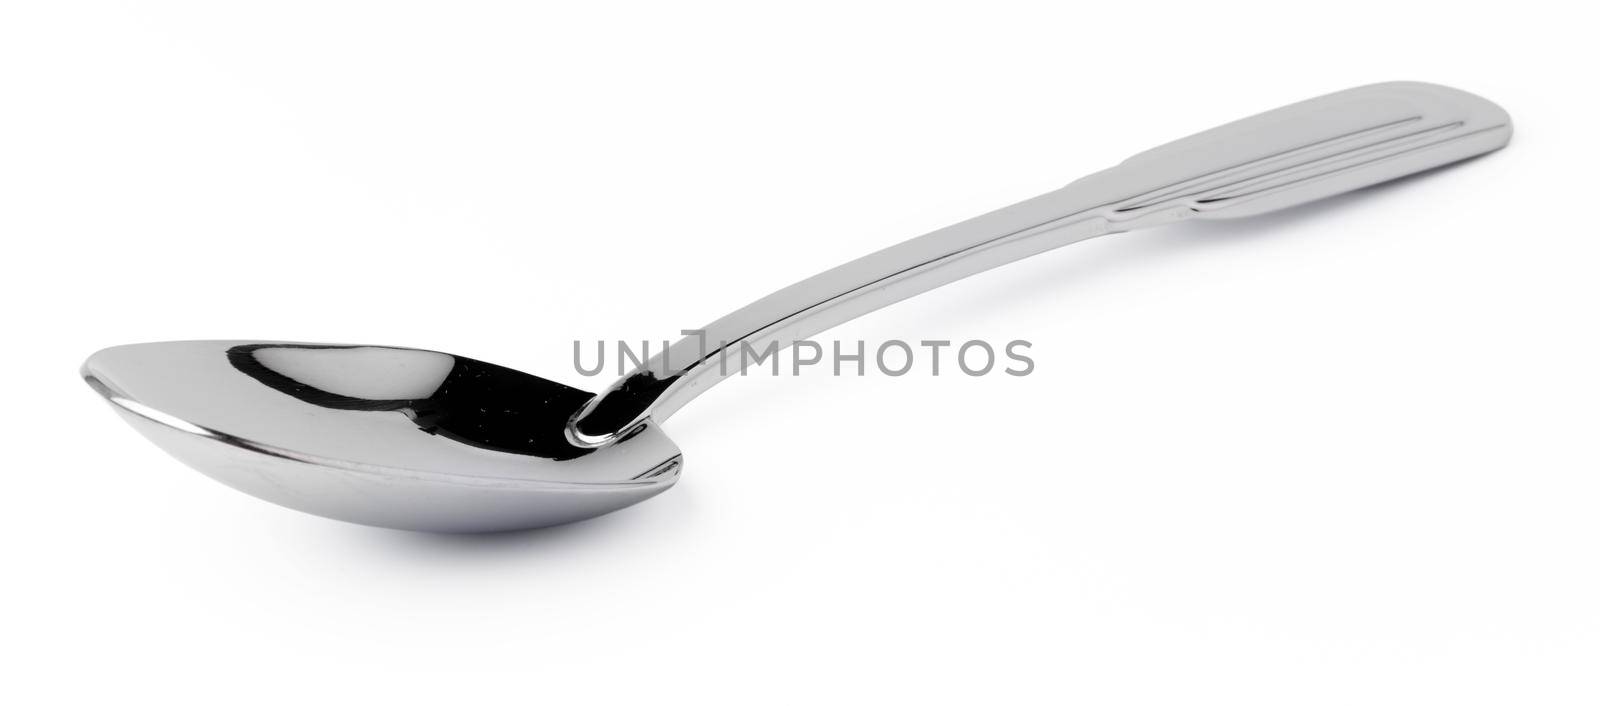 Metal steel spoon isolated on white background by Fabrikasimf